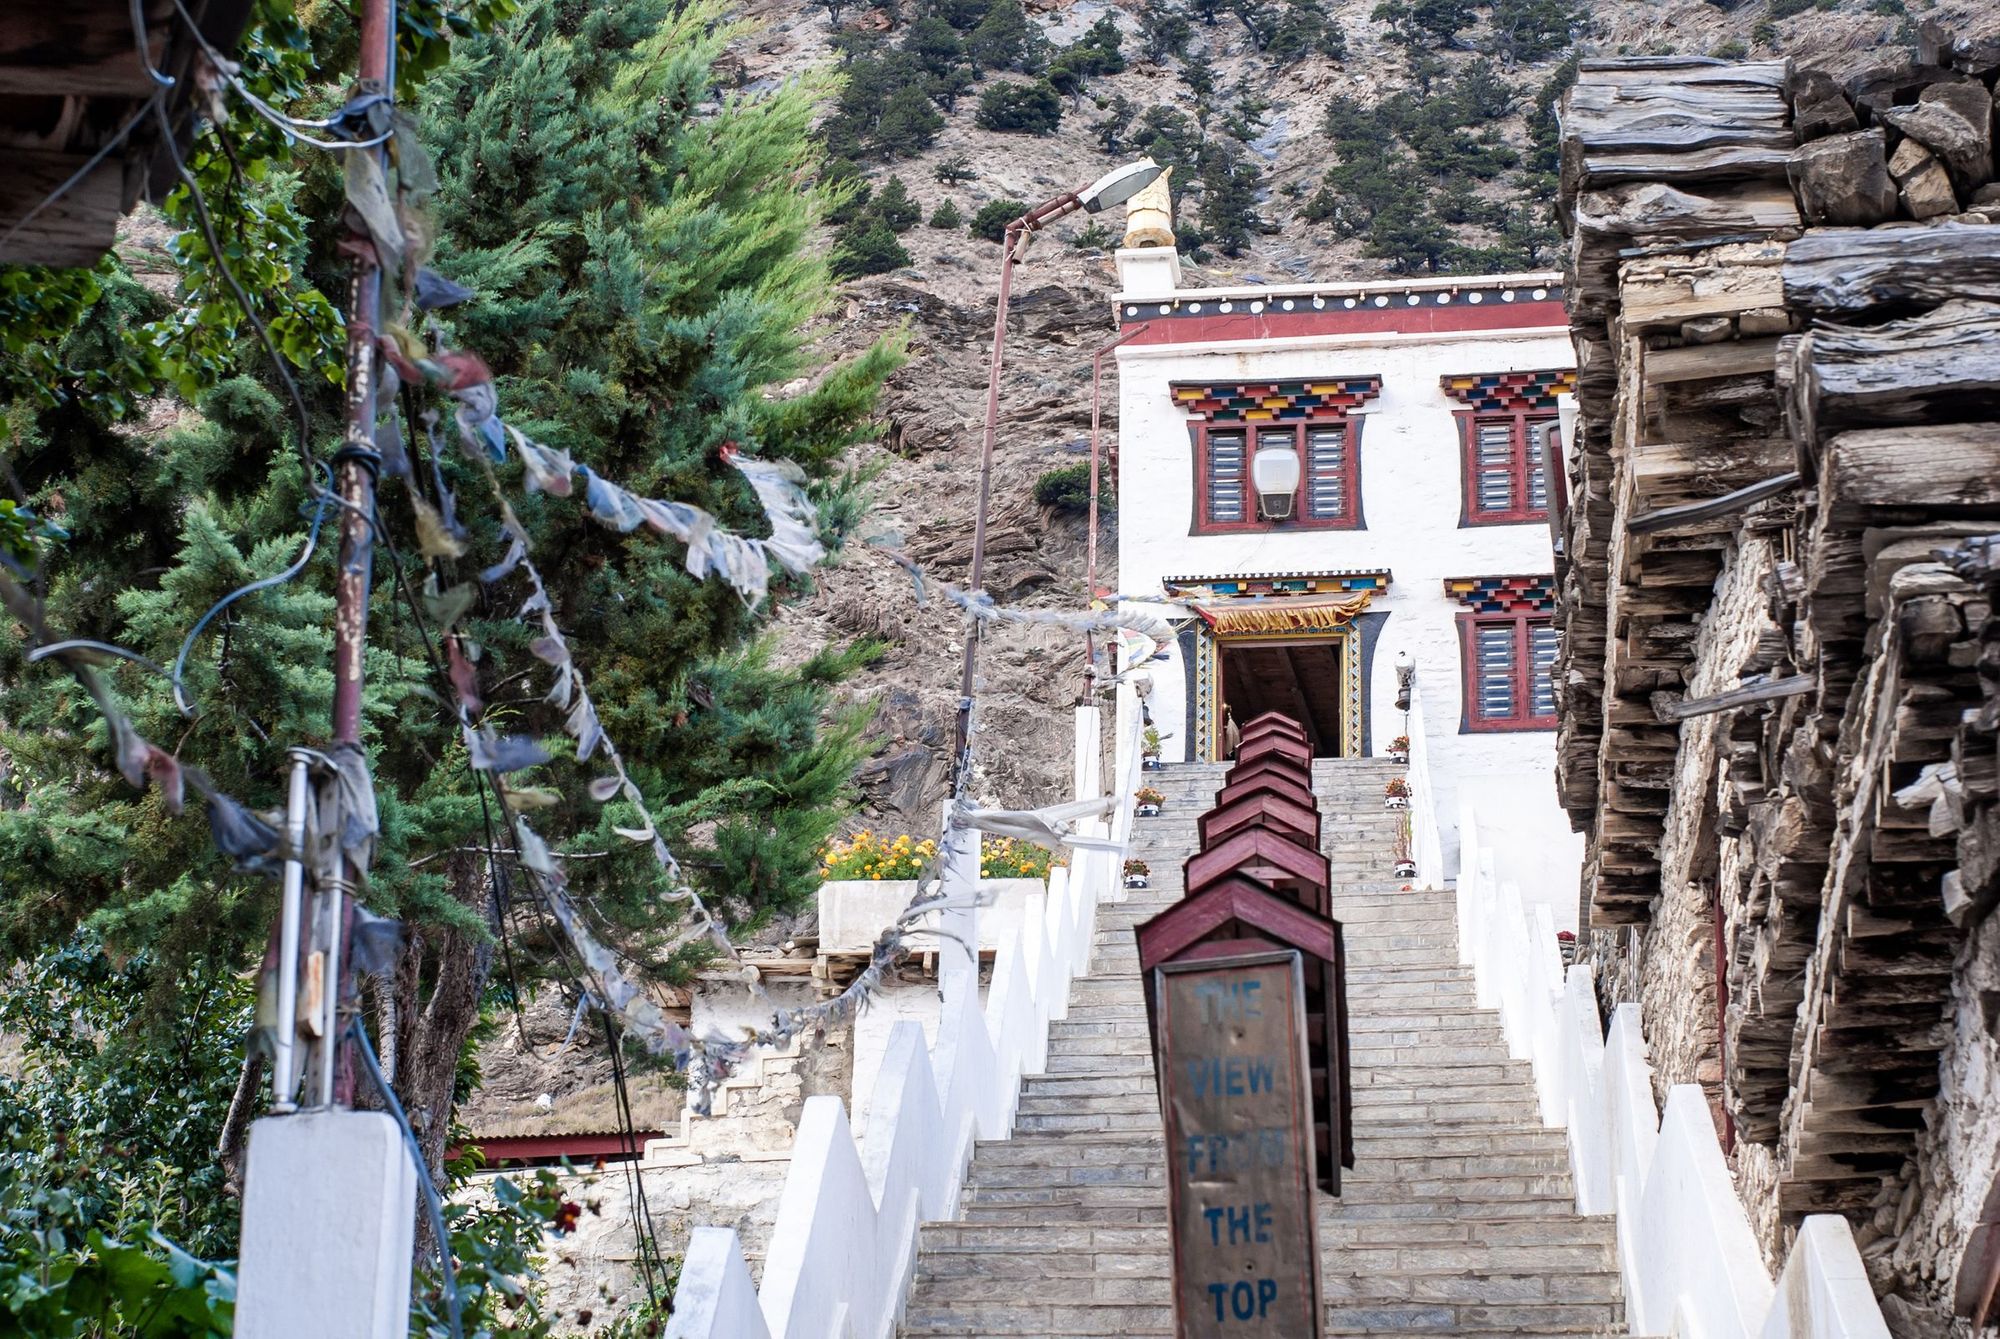 A temple in Nepal's Mustang district.